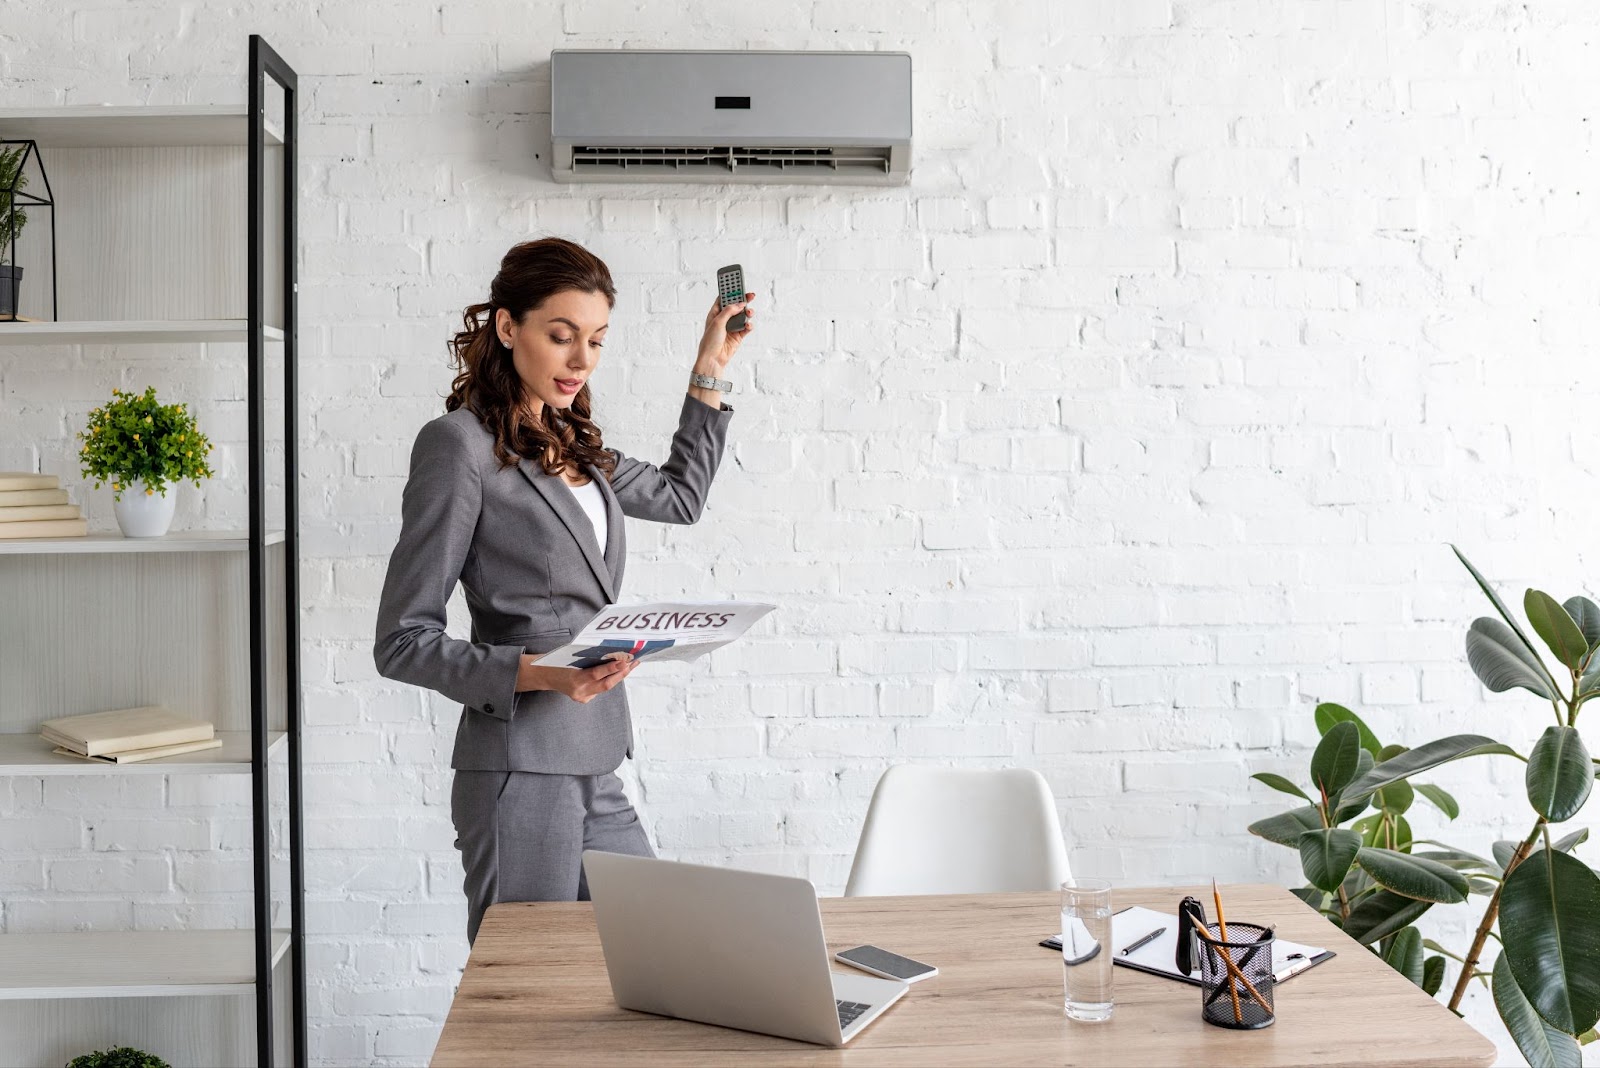 A businesswoman adjusts a ductless AC unit with a remote, engrossed in reading a newspaper. A laptop sits on a table in front of her, with a shelf and plant on her side.